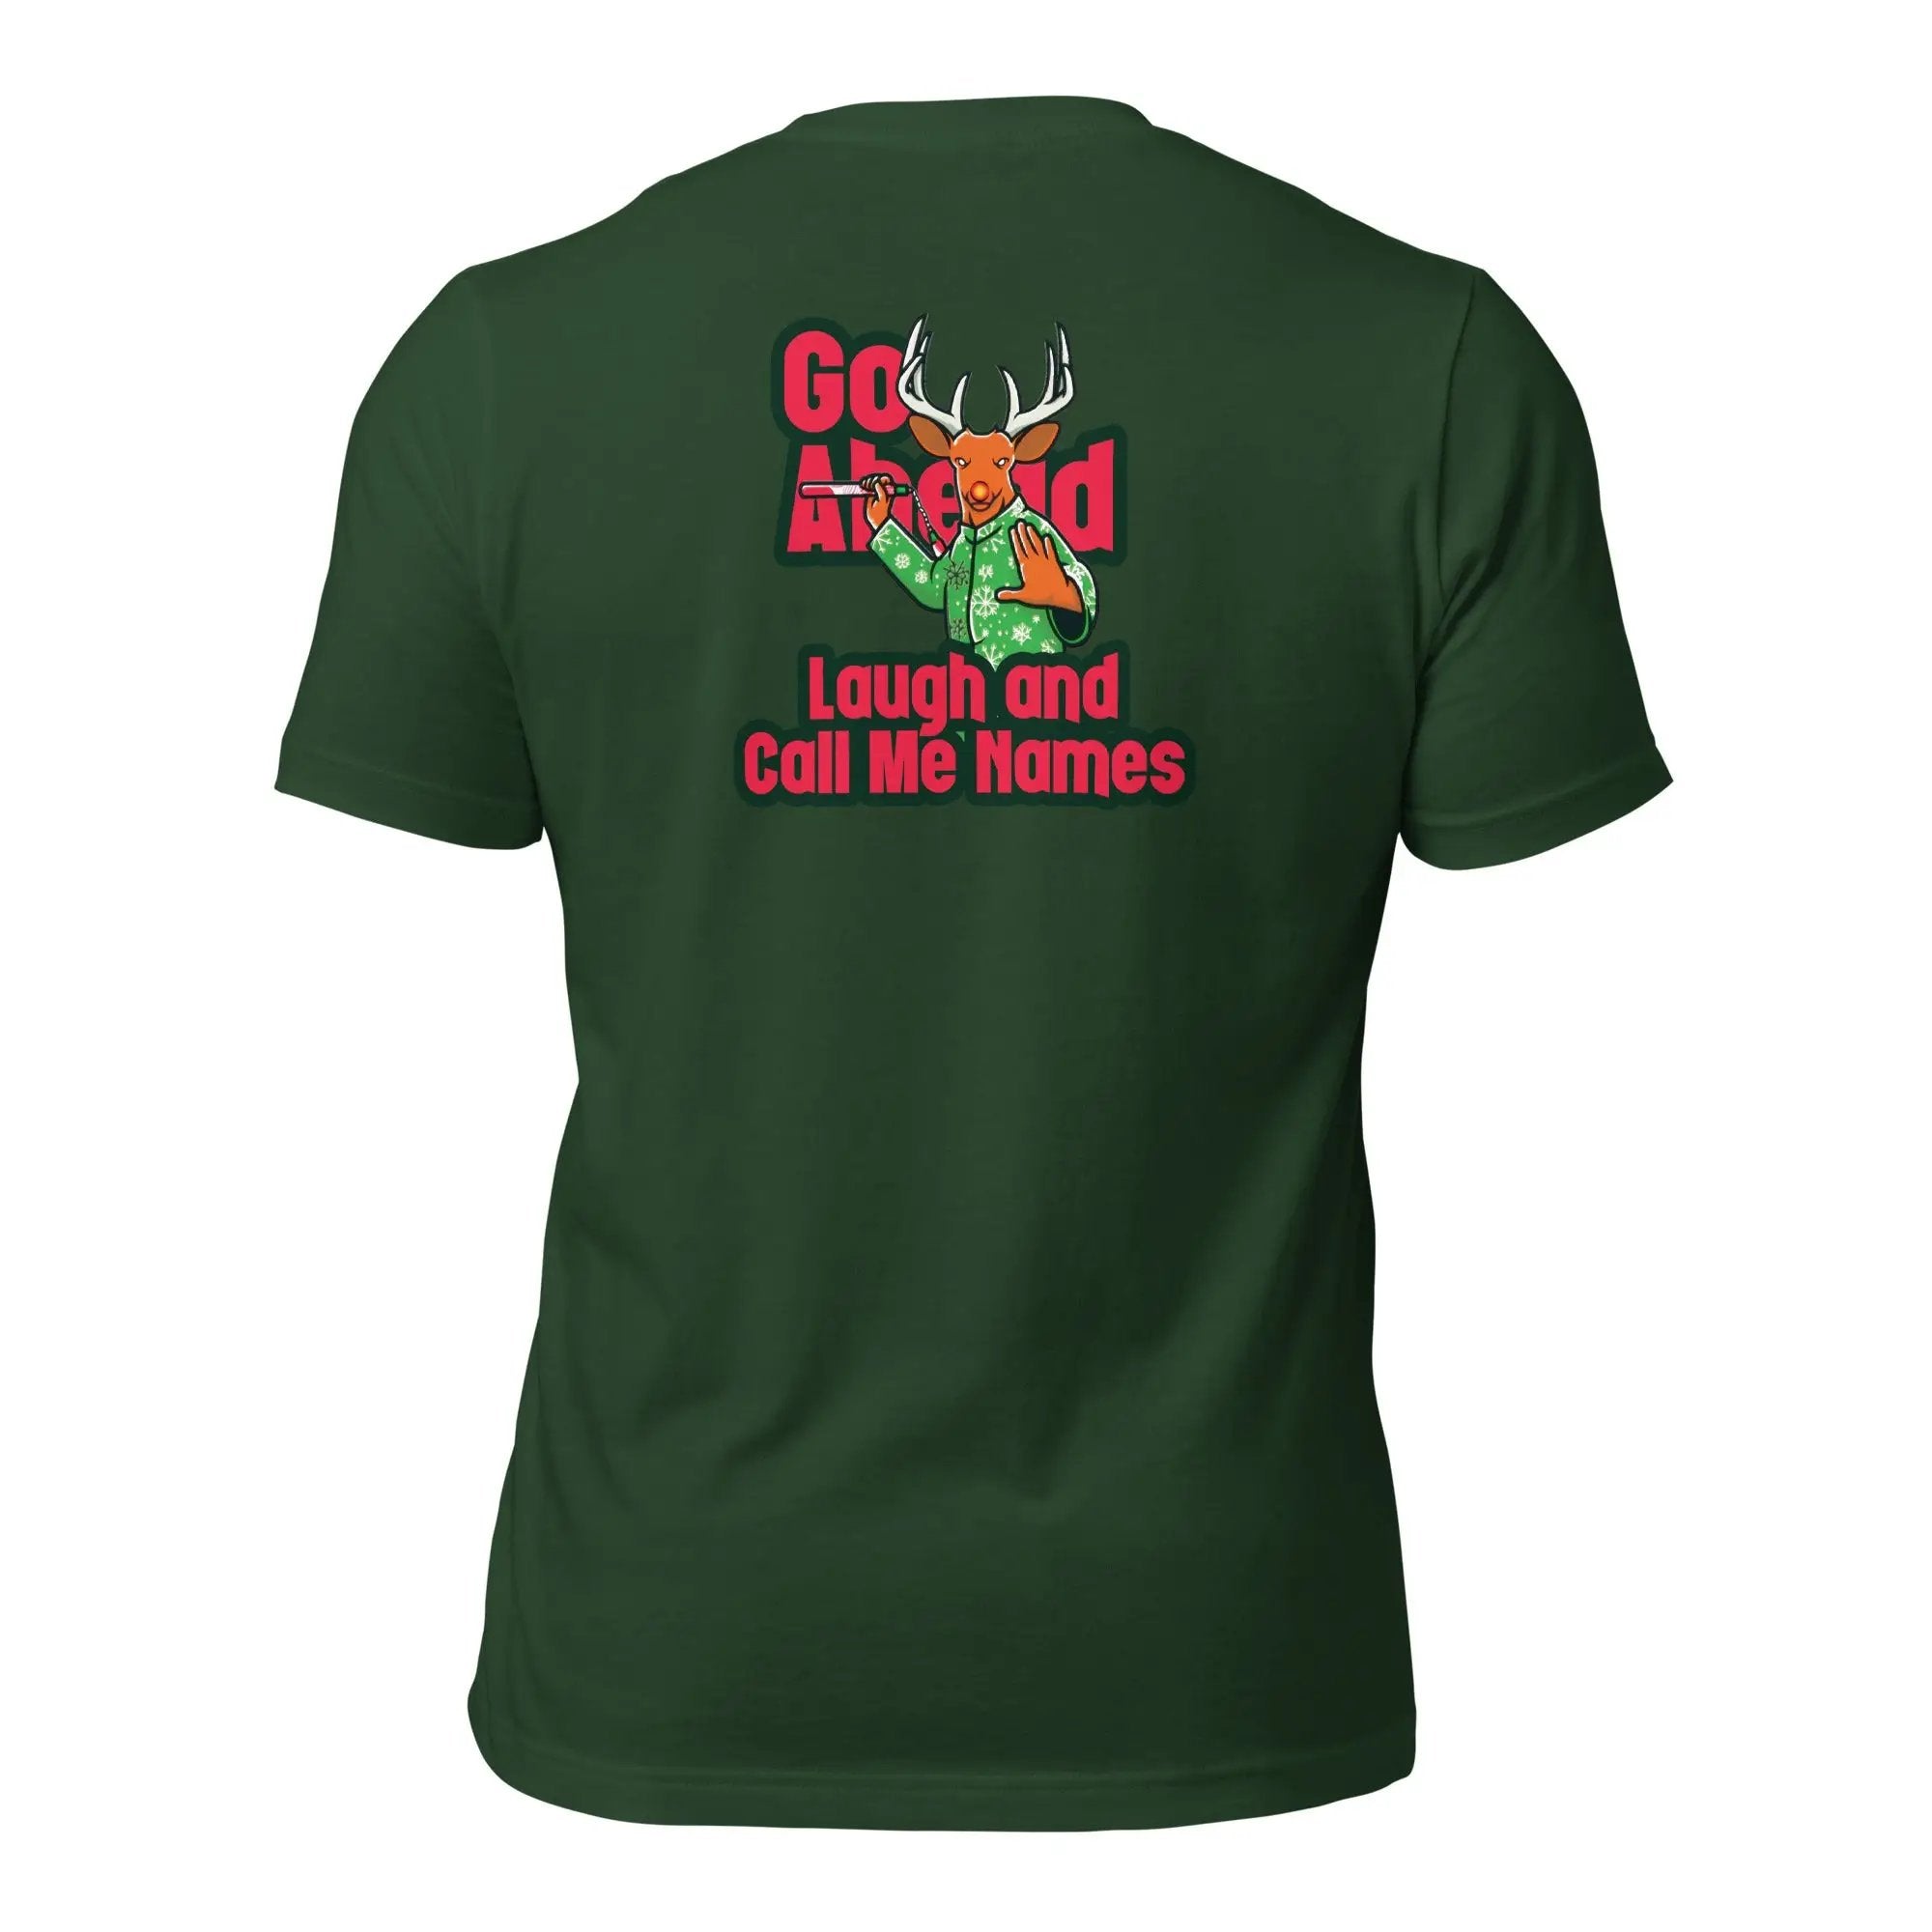 a green t - shirt that says go ahead laugh and call me home